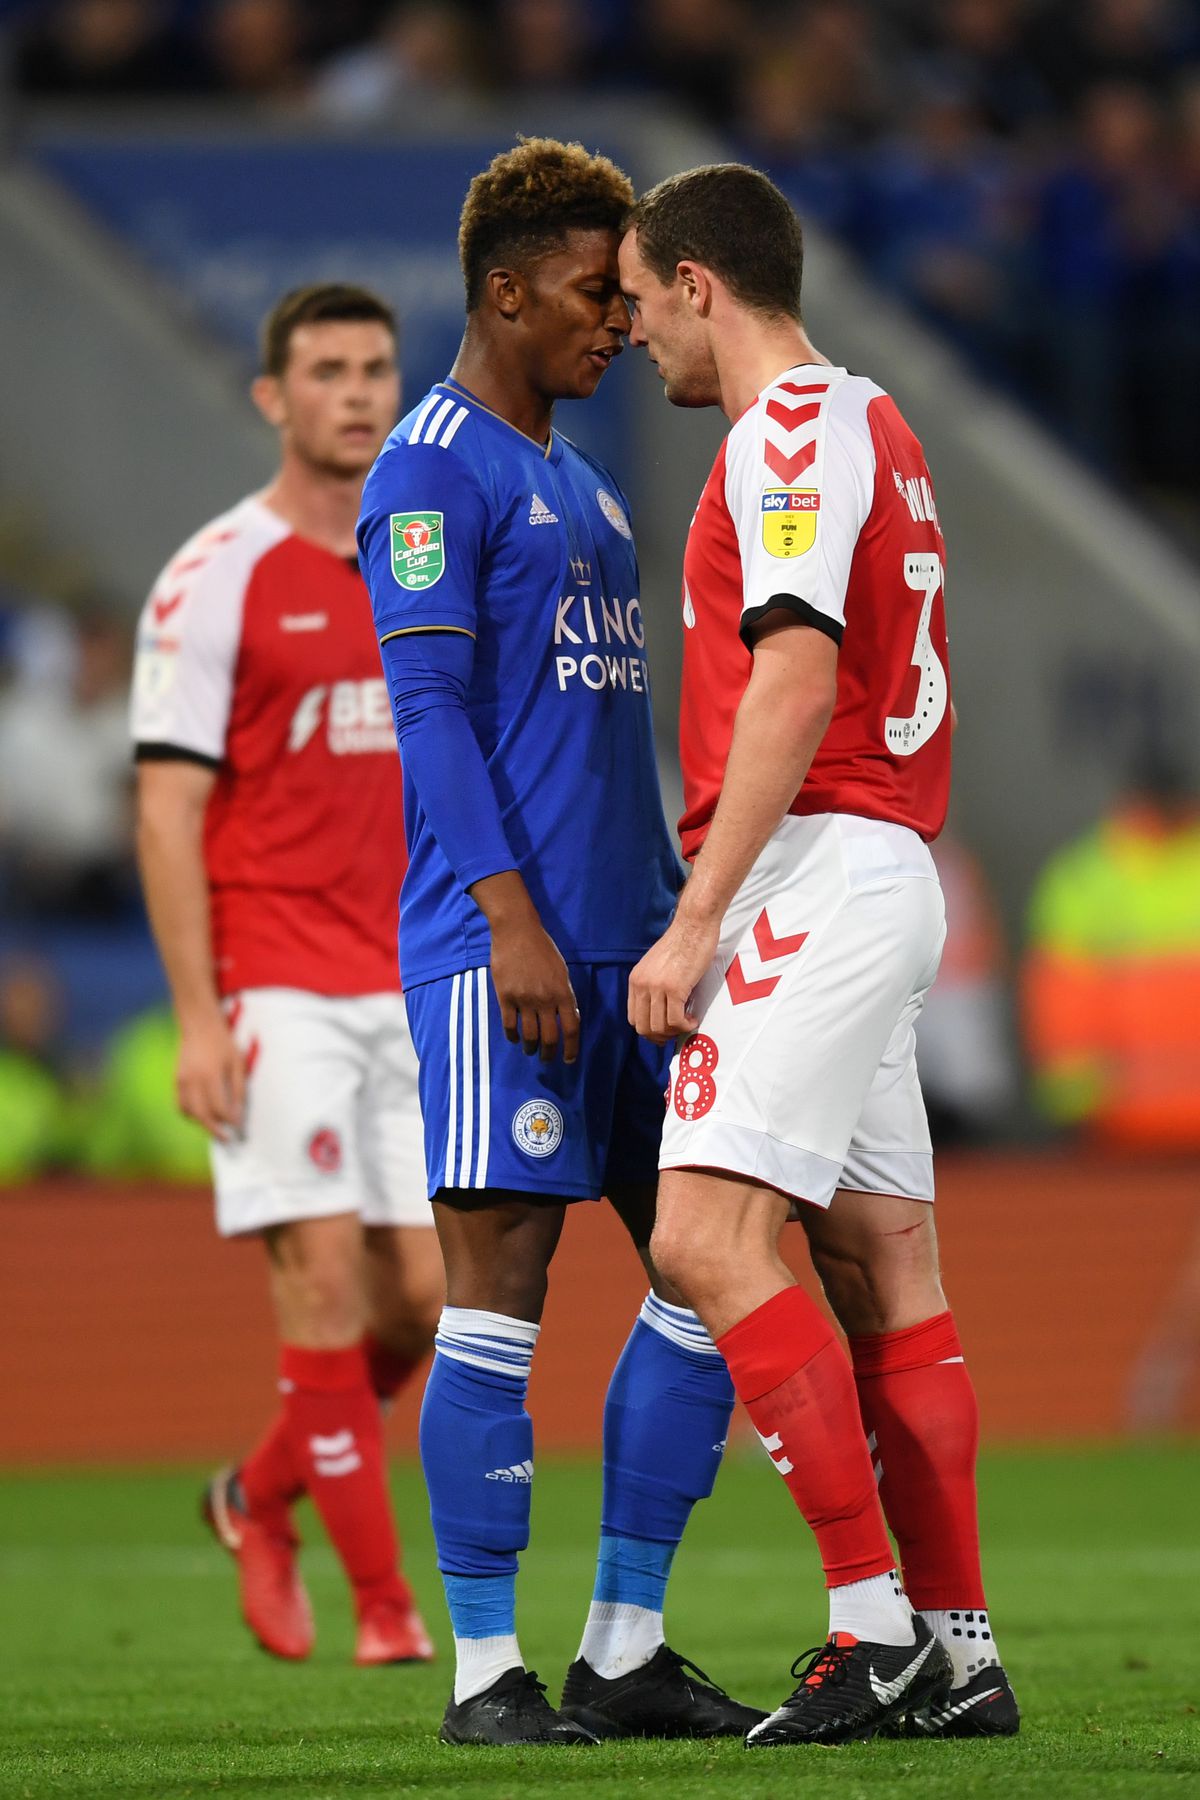 Leicester City v Fleetwood Town - Carabao Cup Second Round